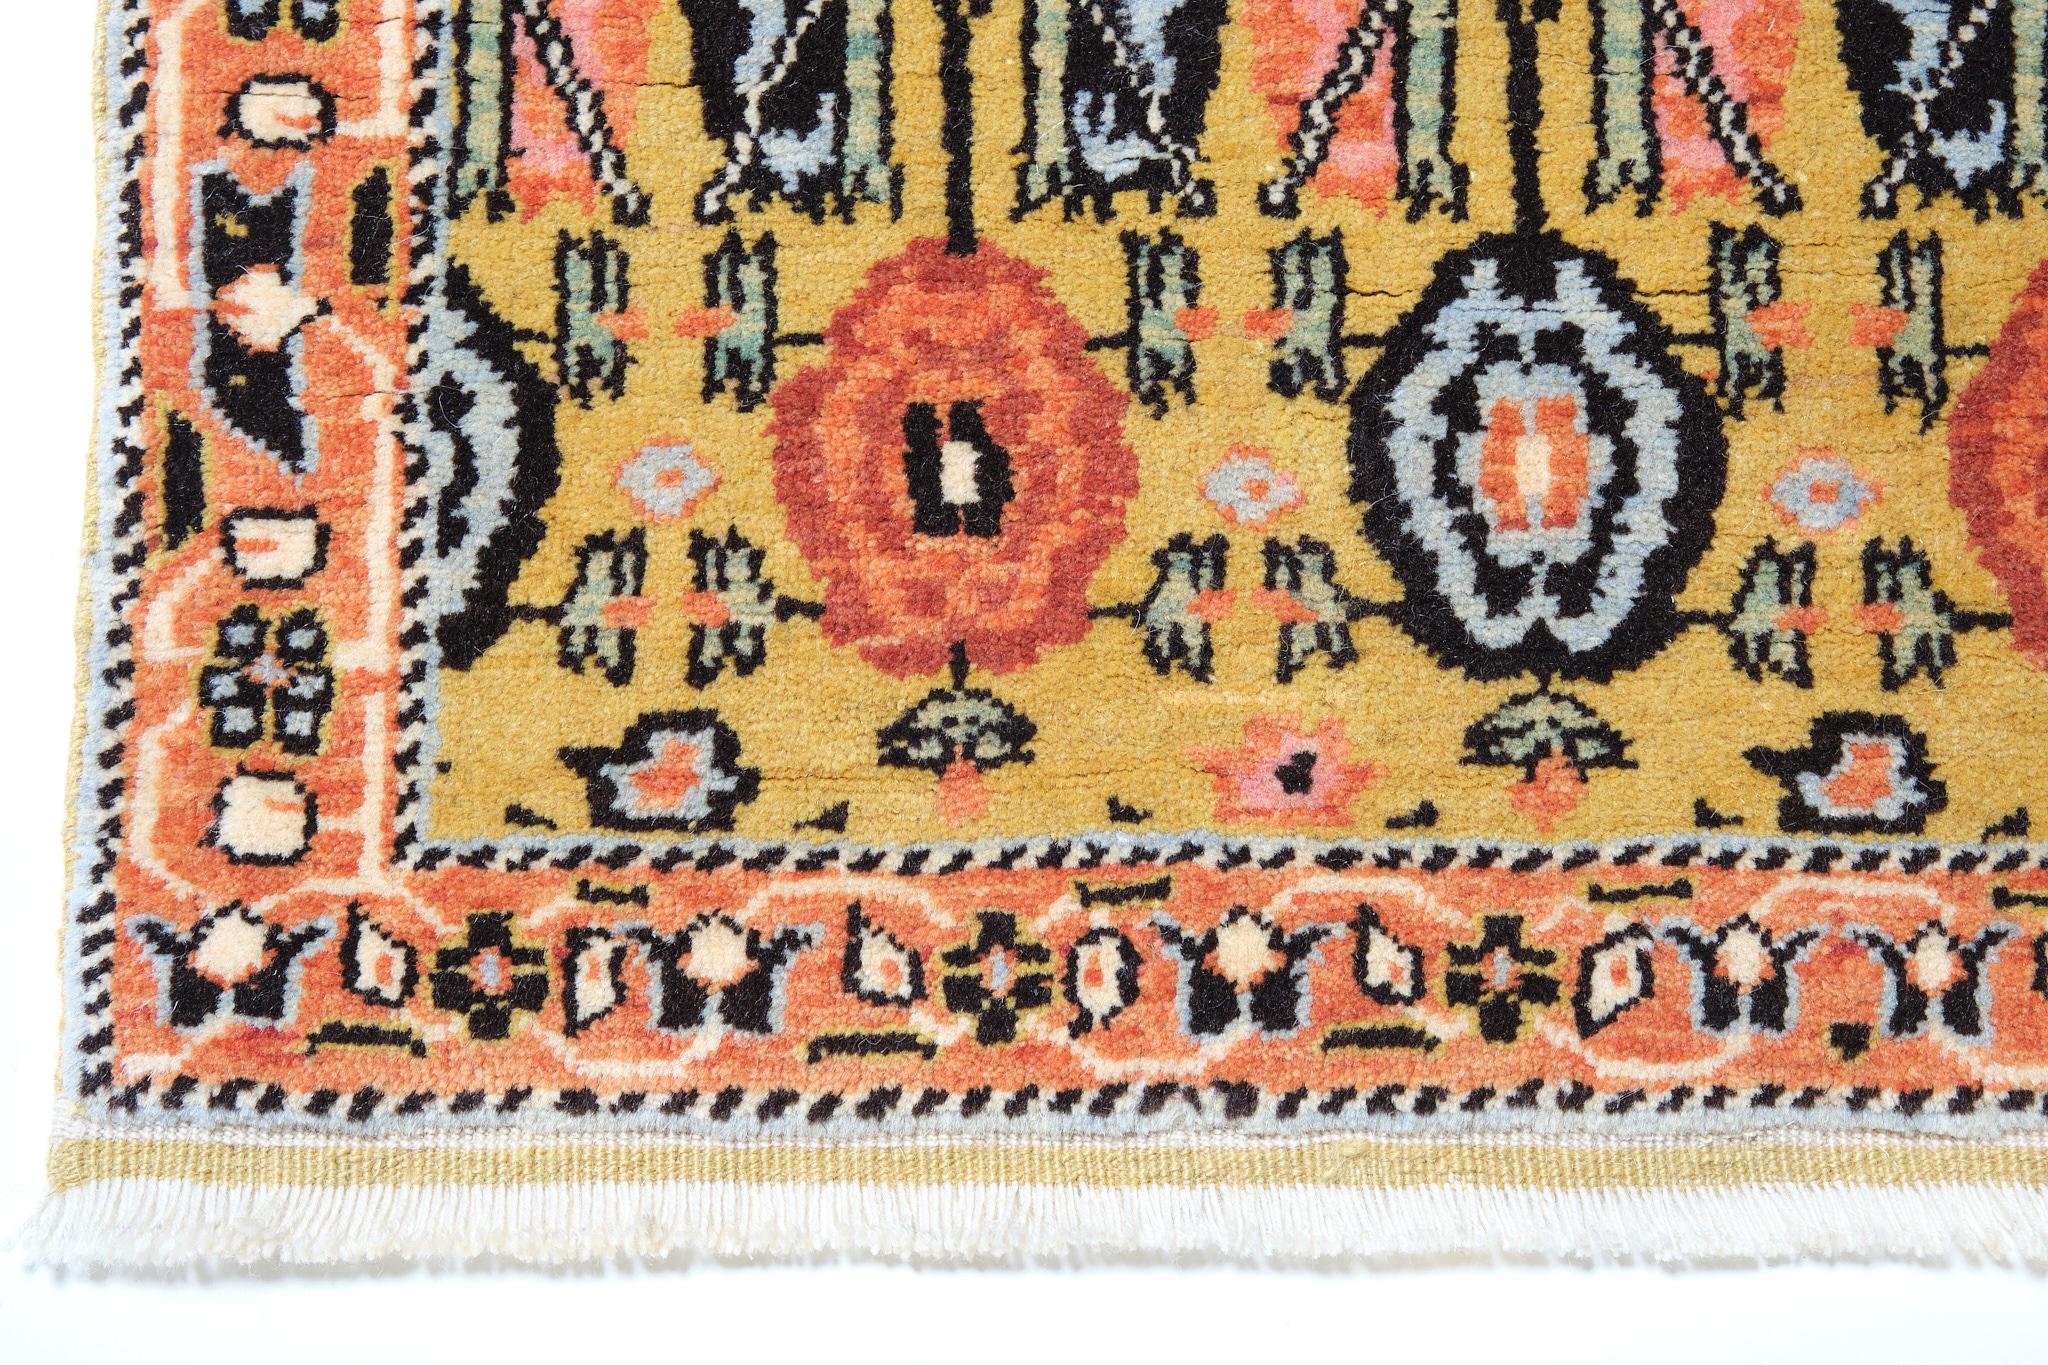 The source of the rug comes from the book Antique Rugs of Kurdistan A Historical Legacy of Woven Art, James D. Burns, 2002 nr.28. This was an exclusive example of offset rows of flowers designed 18th-century rug from Senna, Eastern Kurdistan area.